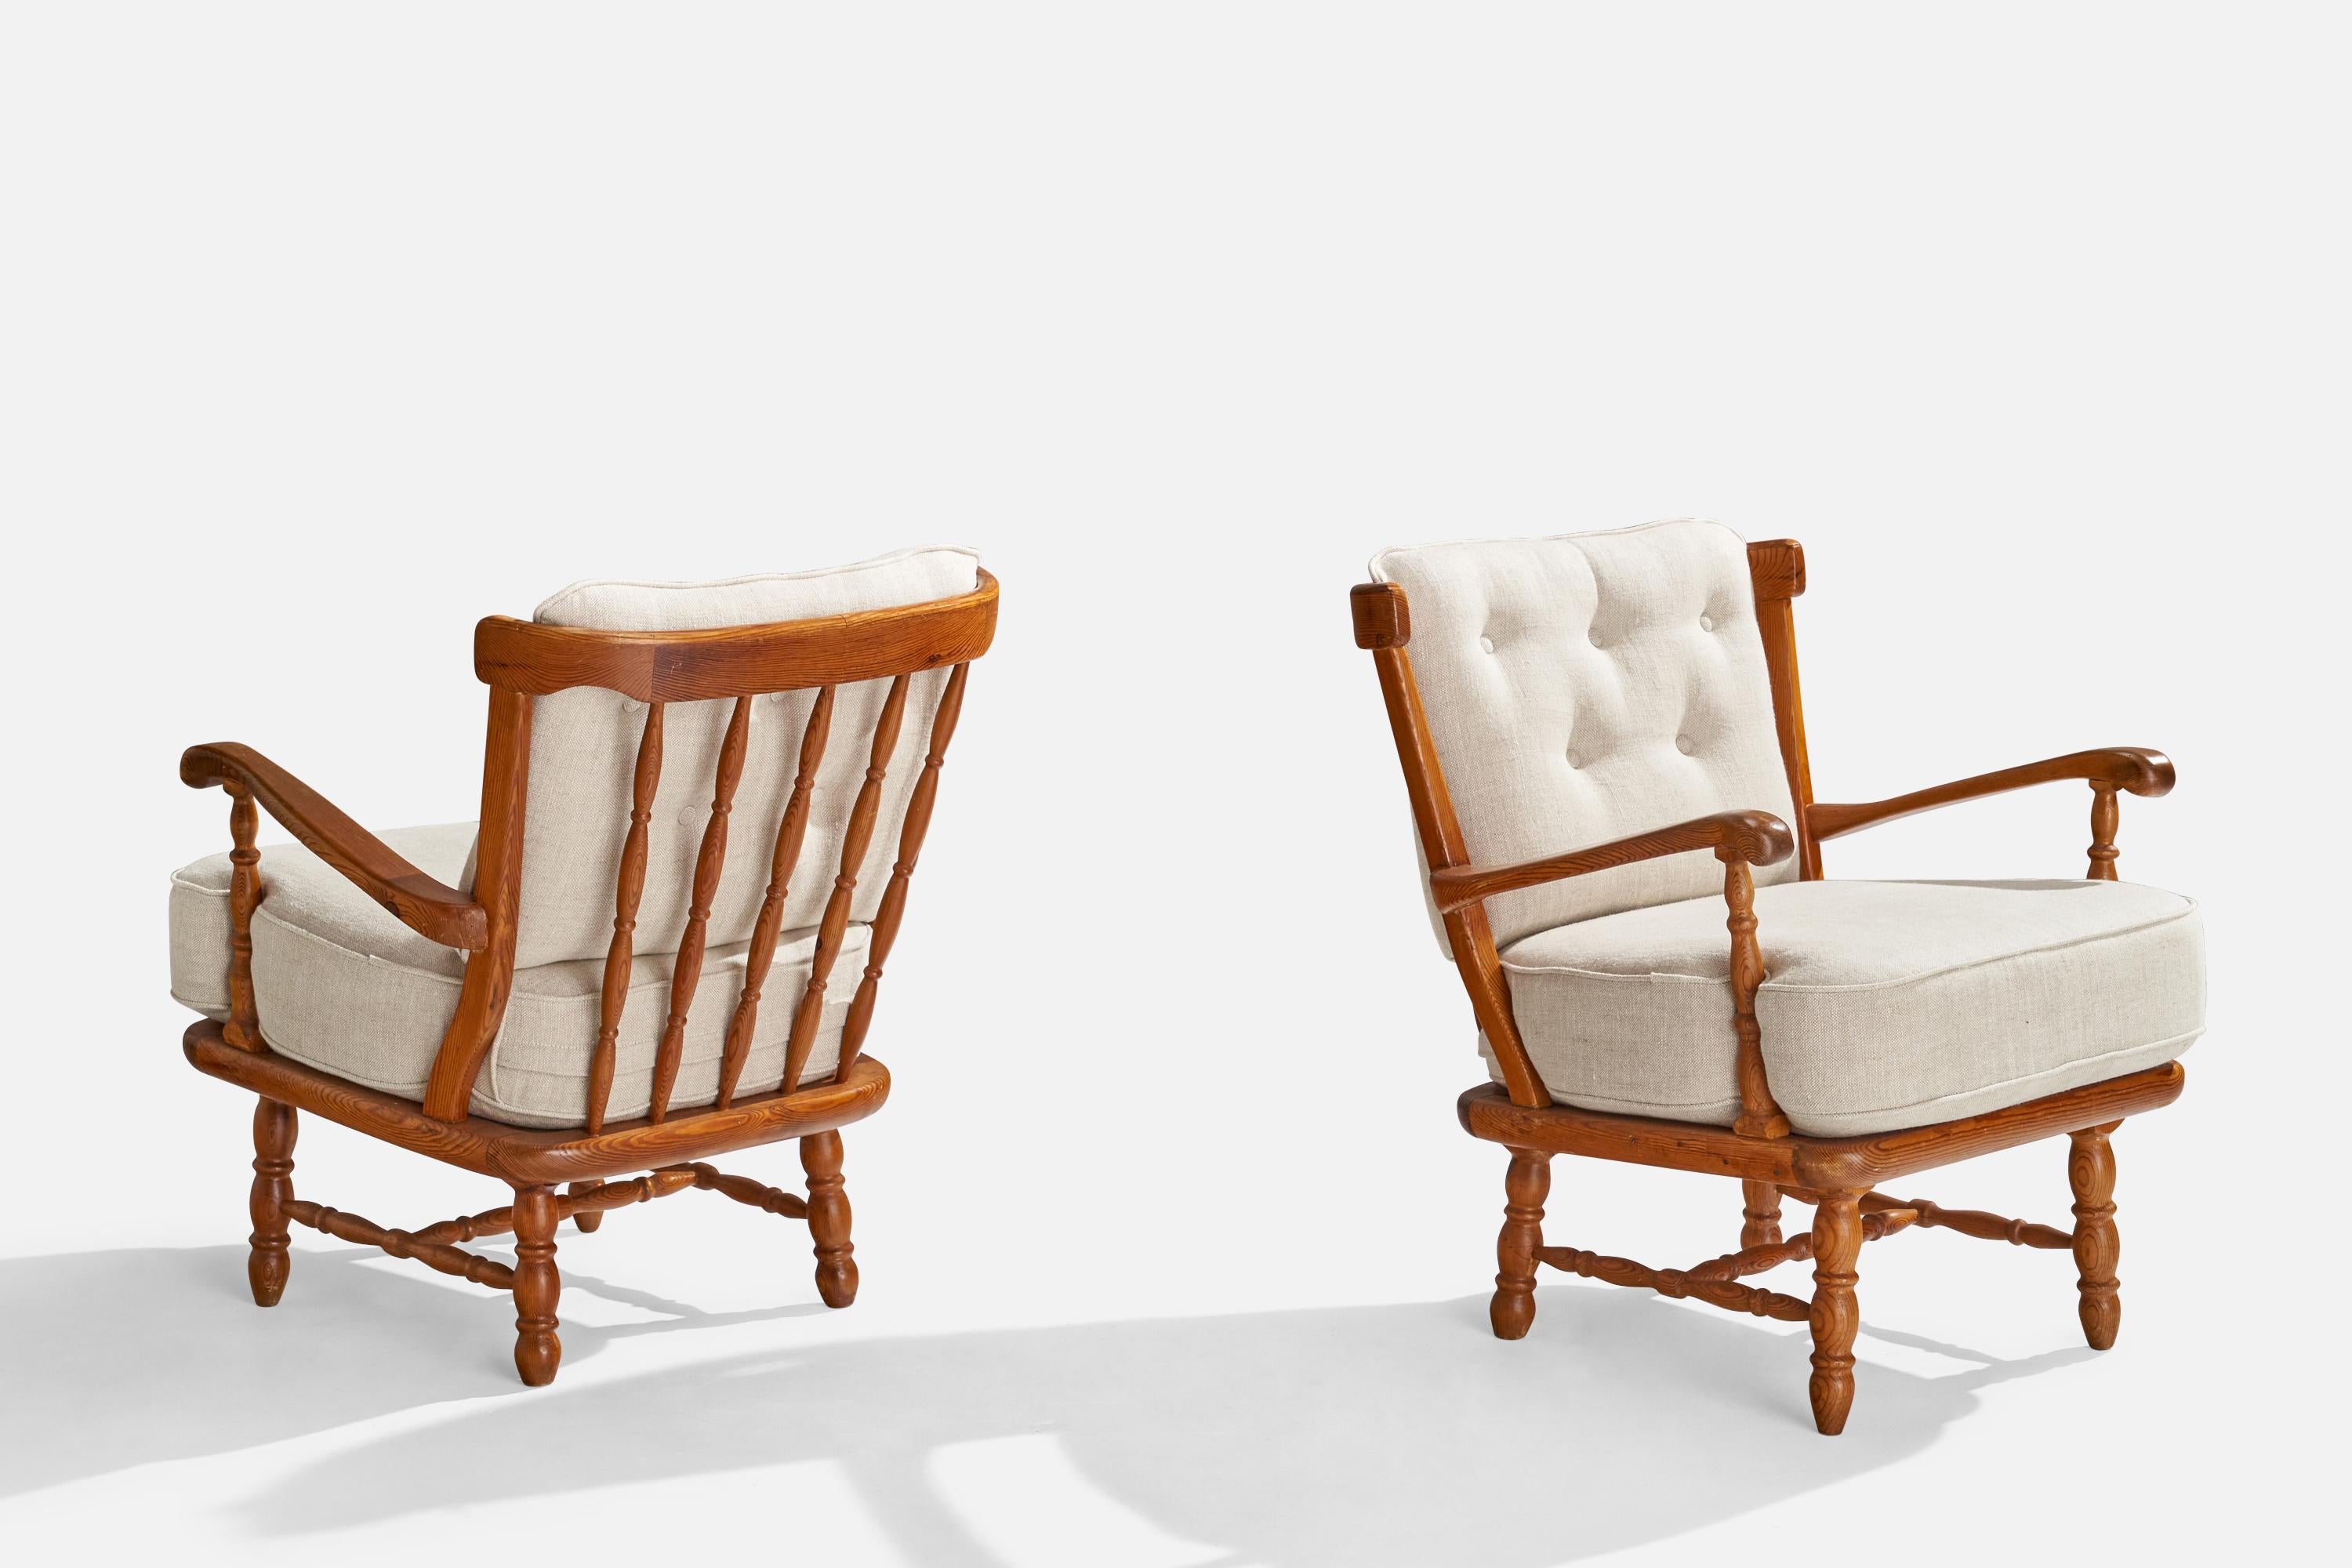 Göperts, Lounge Chairs, Pine, Fabric, Sweden, 1950s For Sale 4